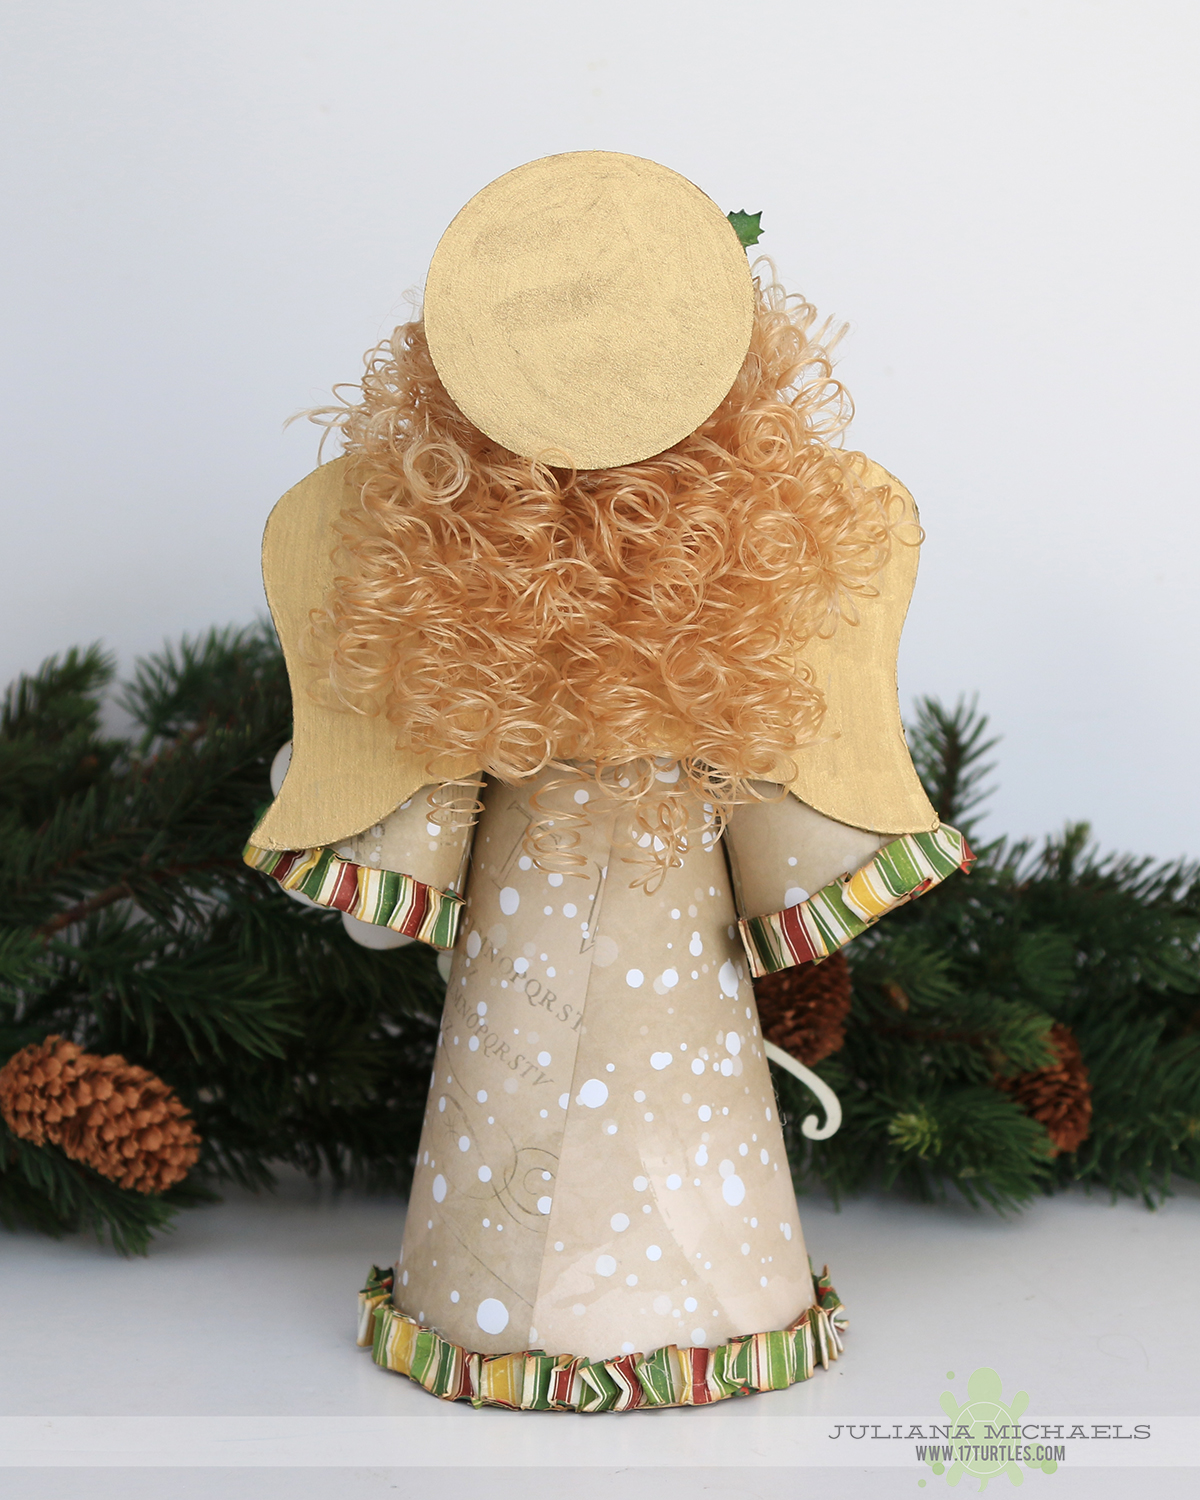 Christmas Angel by Juliana Michaels using BoBunny Christmas Collage and Darice Paper Mache Angel Kit